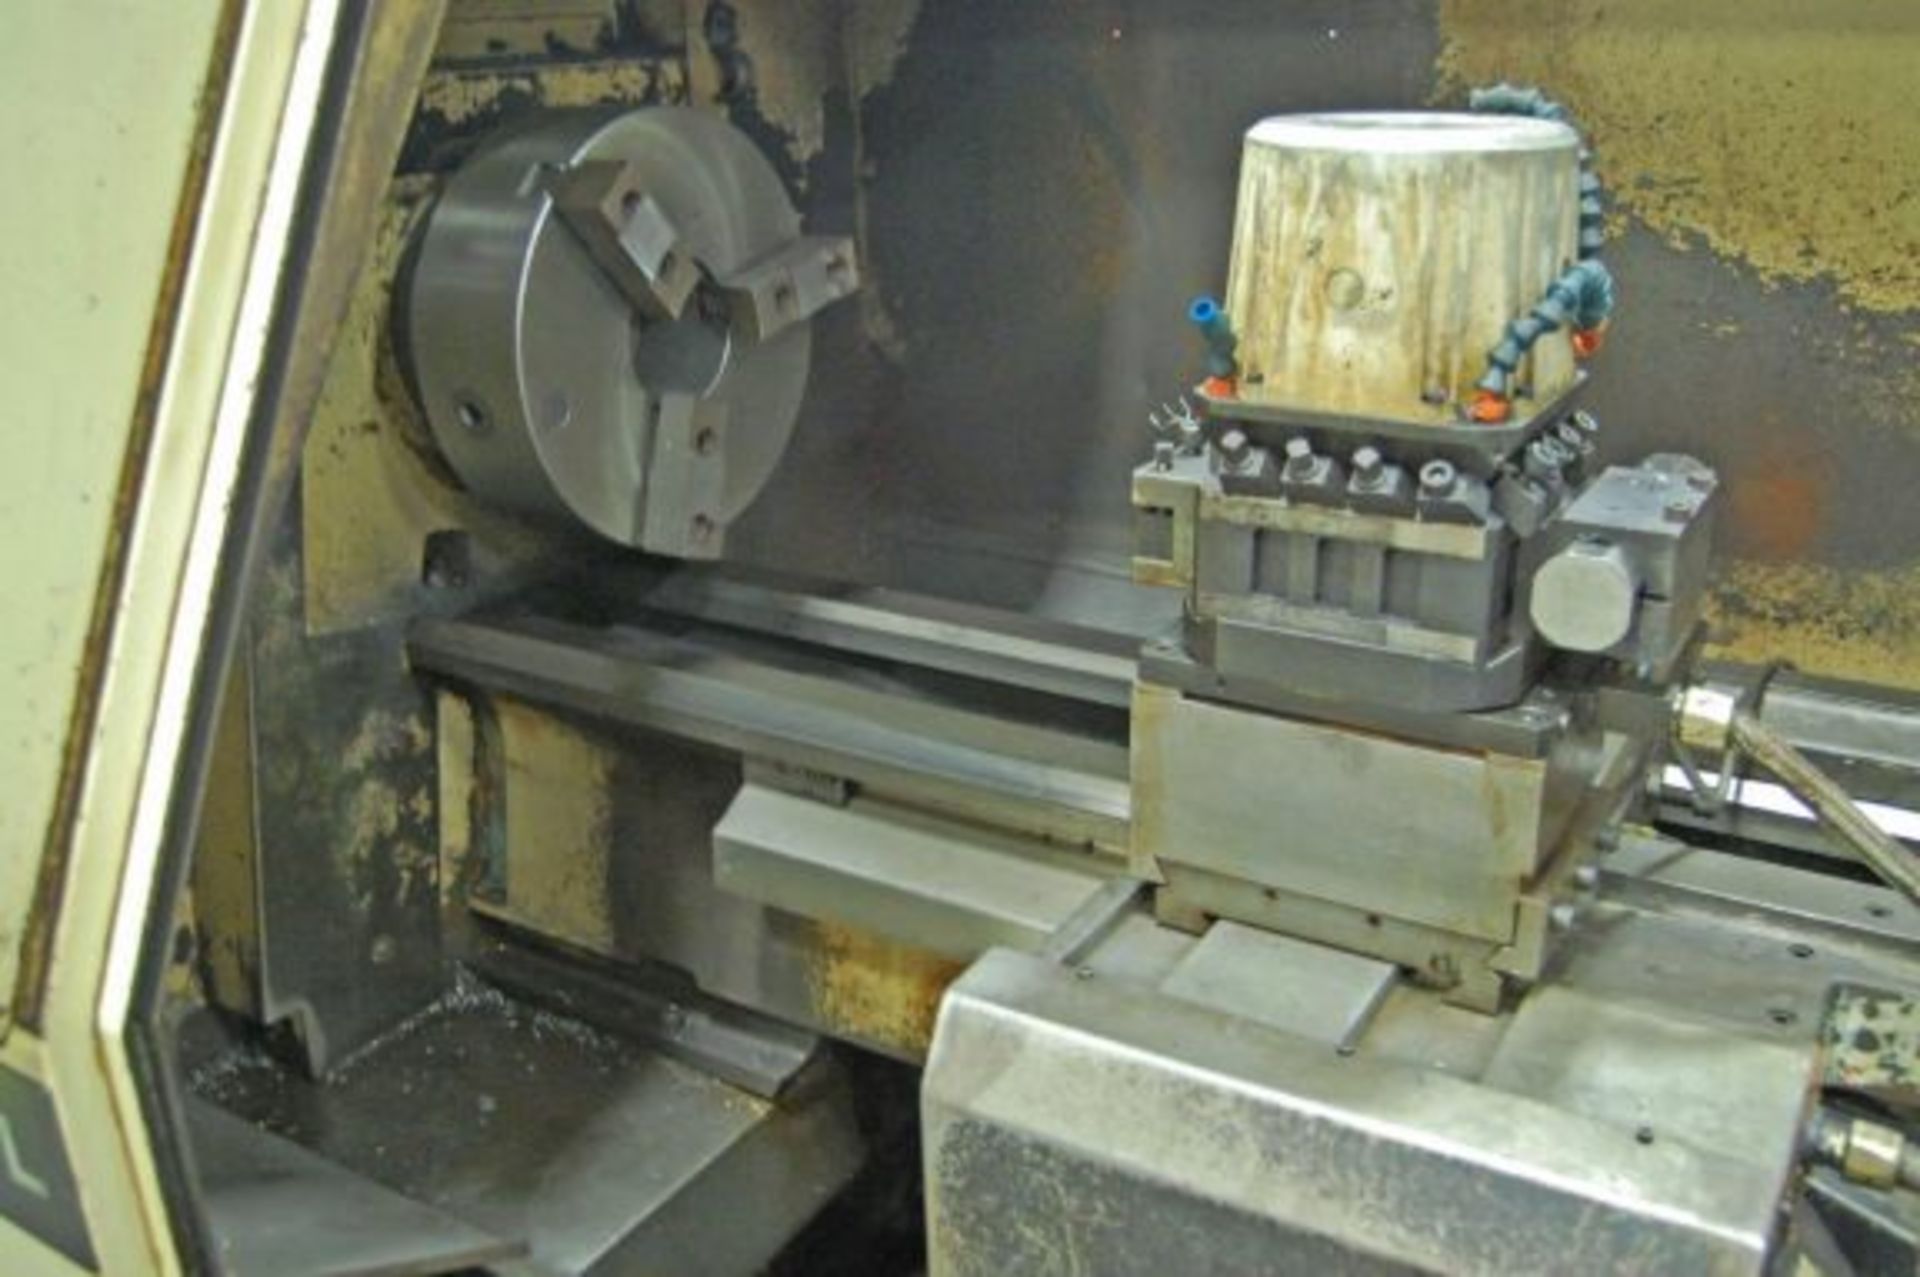 21" x 80" CLAUSING Model CNC-4000L CNC Lathe, 21" Swing Over Bed, 14.5"   Swing Over Cross Slide, - Image 2 of 8